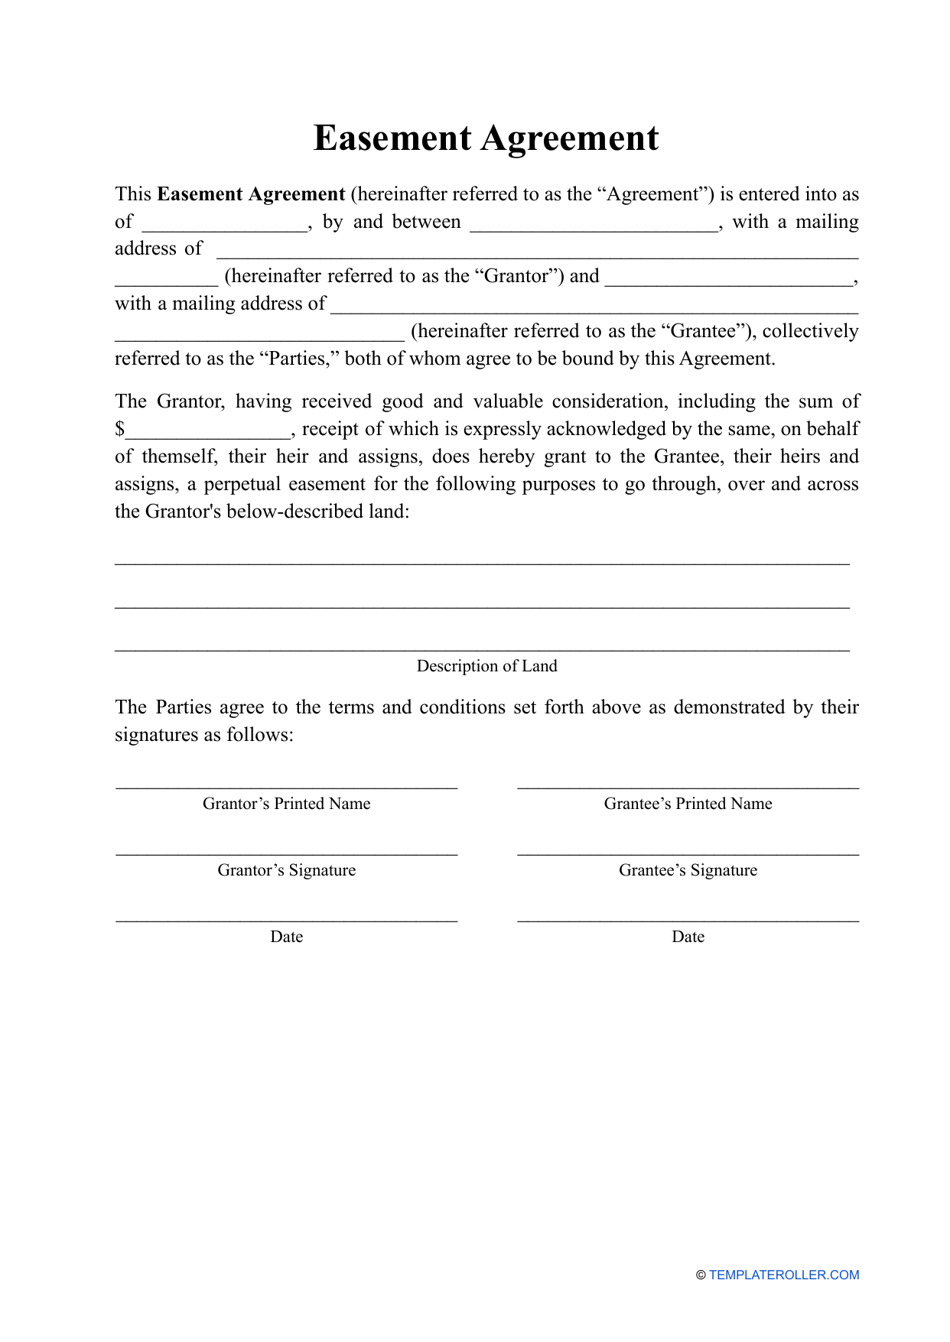 Easement Agreement Template, Page 1